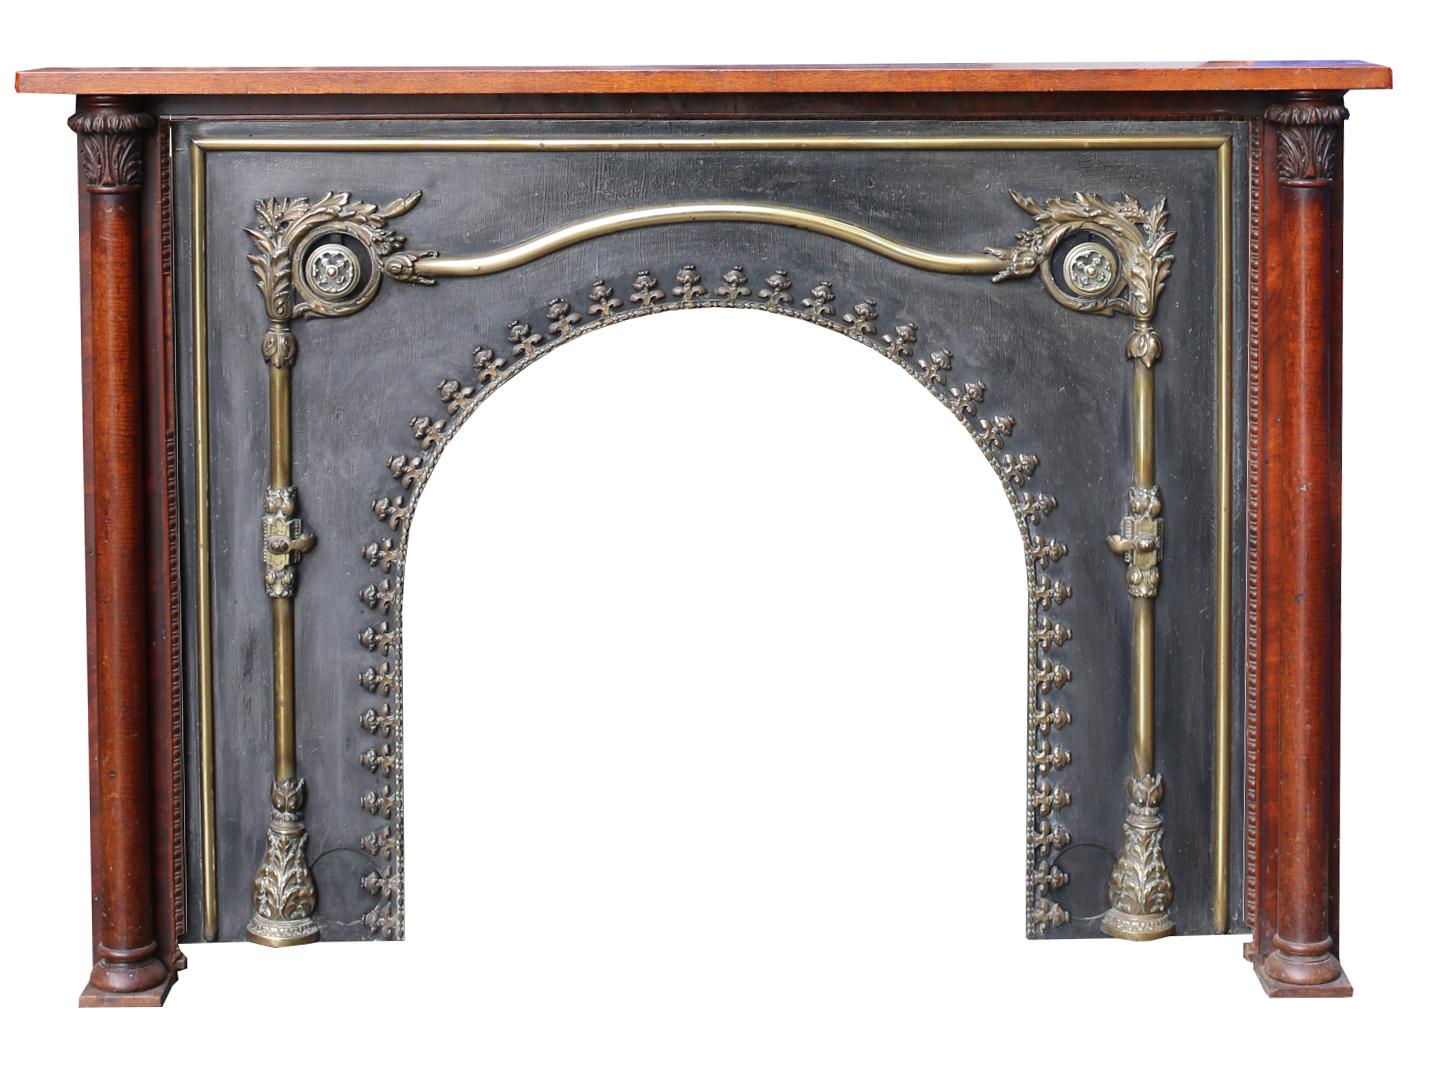 A simple mahogany surround with column jambs. Wrought Iron and cast brass insert with arched opening.

Additional dimensions:

Opening height 64 cm

Opening width 61 cm.